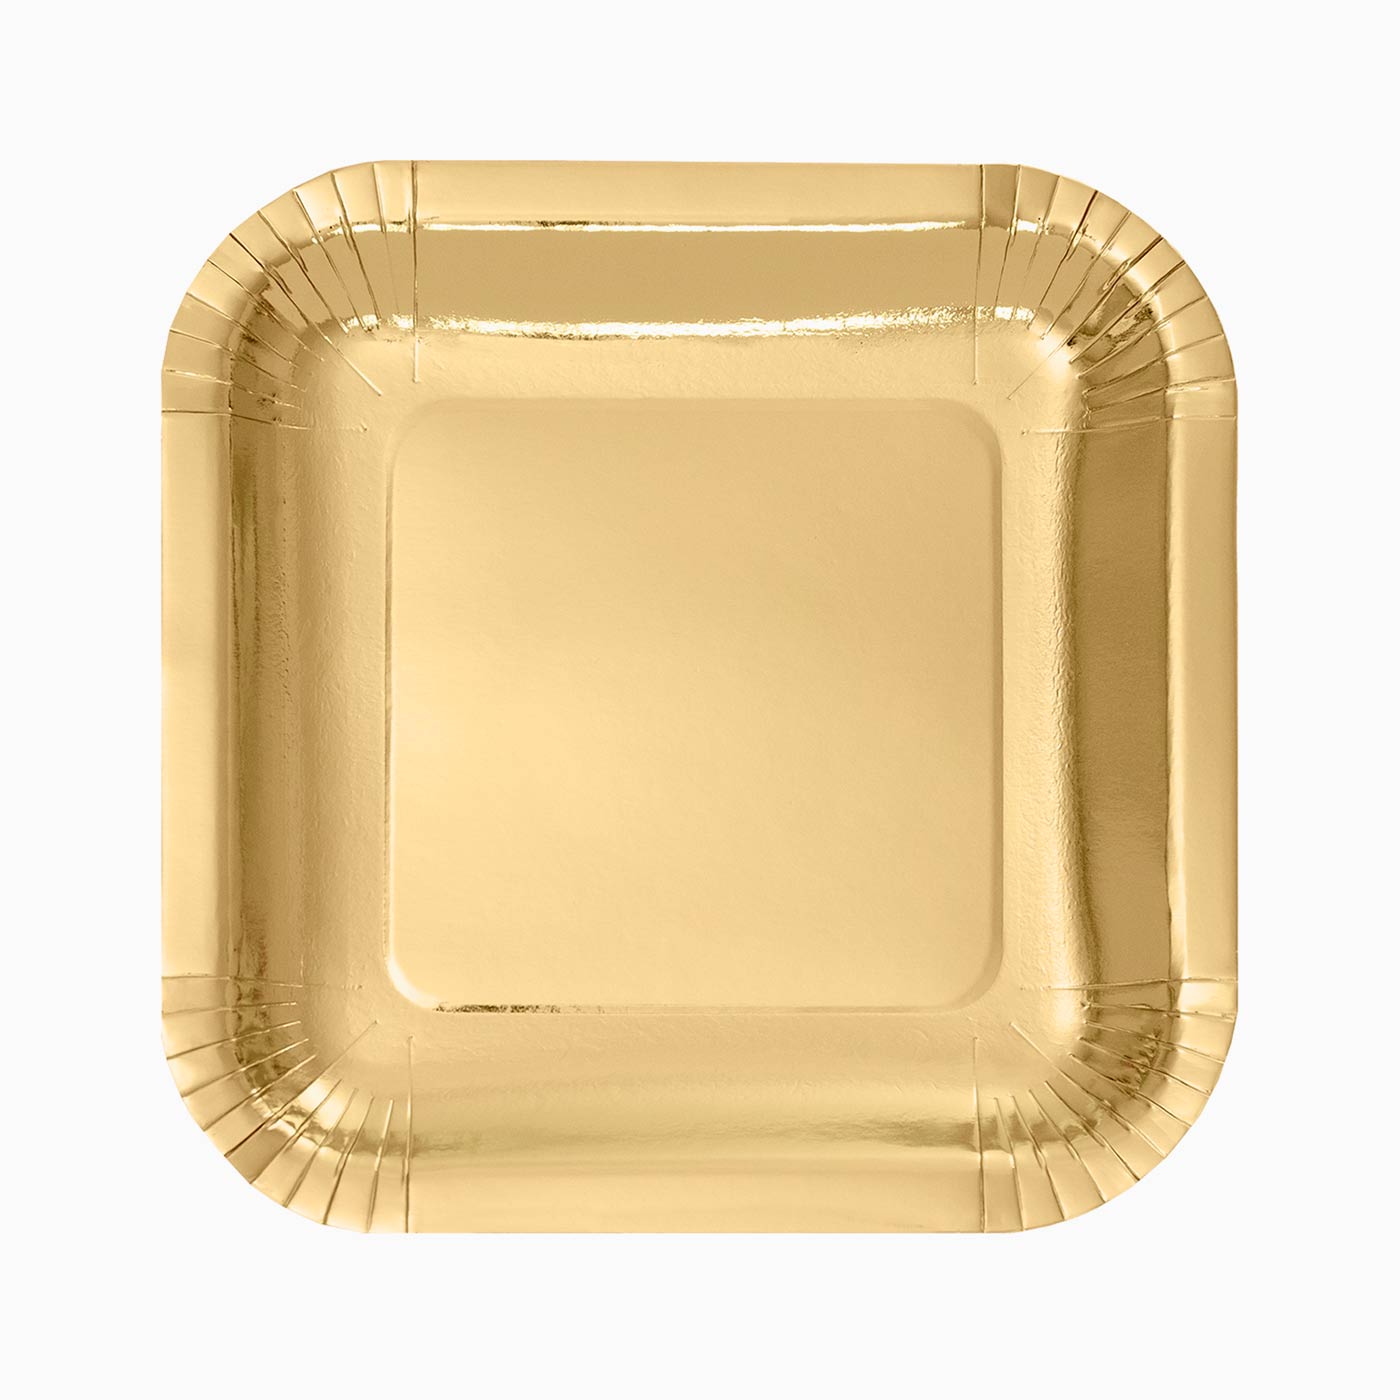 Metallized square cardboard plate 23 x 23 cm gold